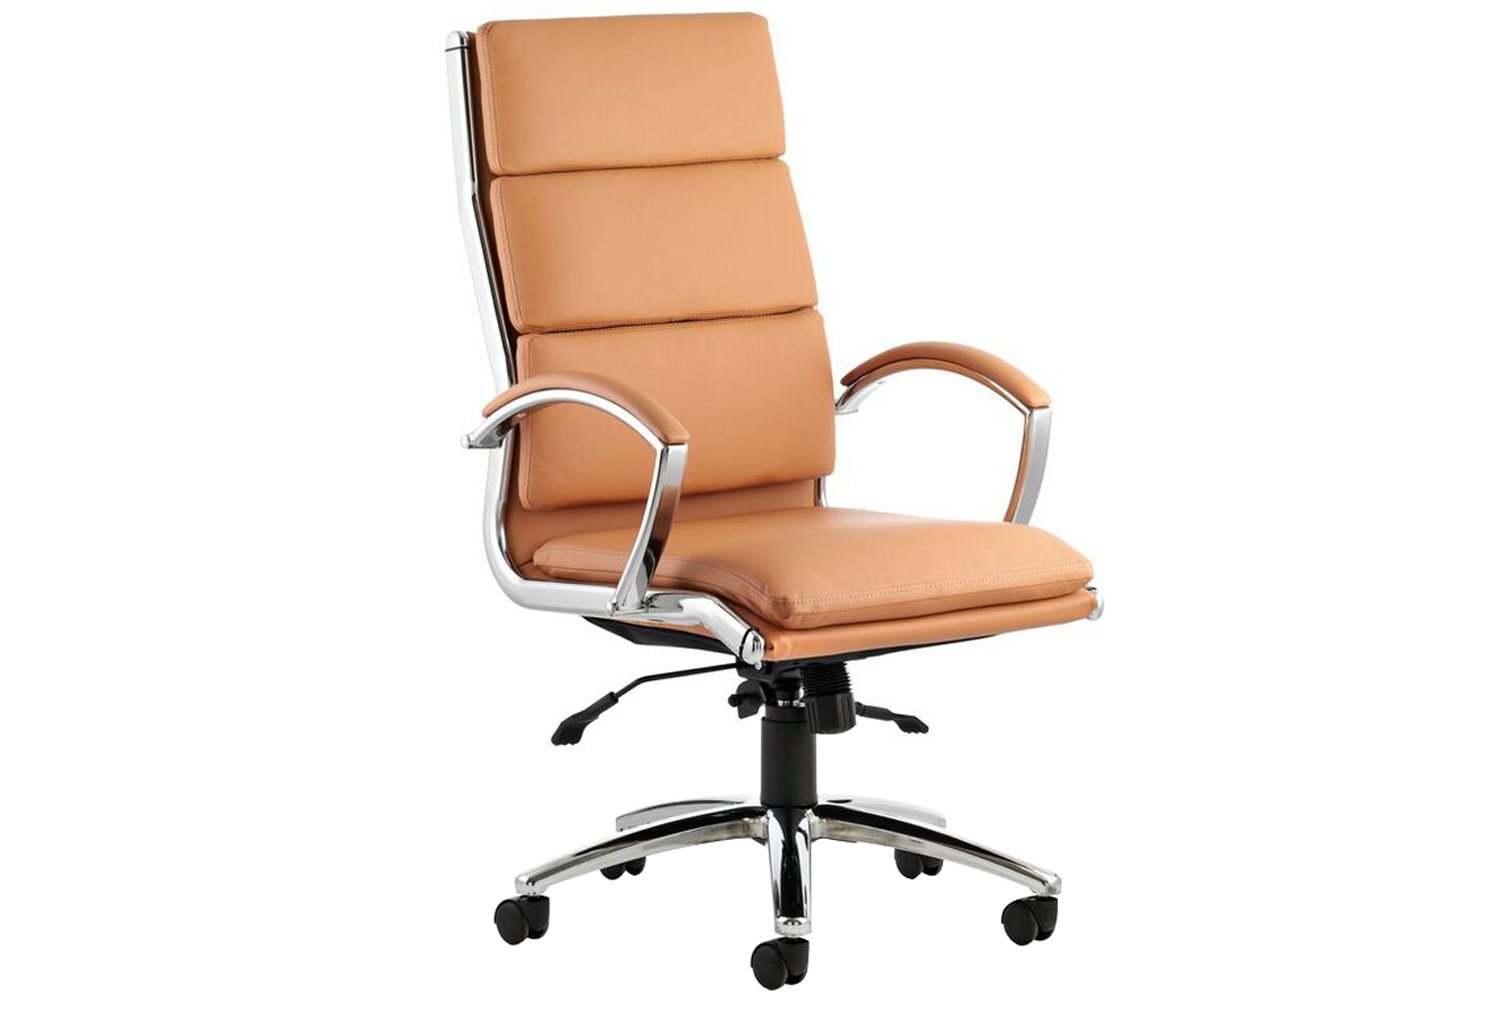 Andorra High Back Leather Faced Executive Office Chair (Tan)